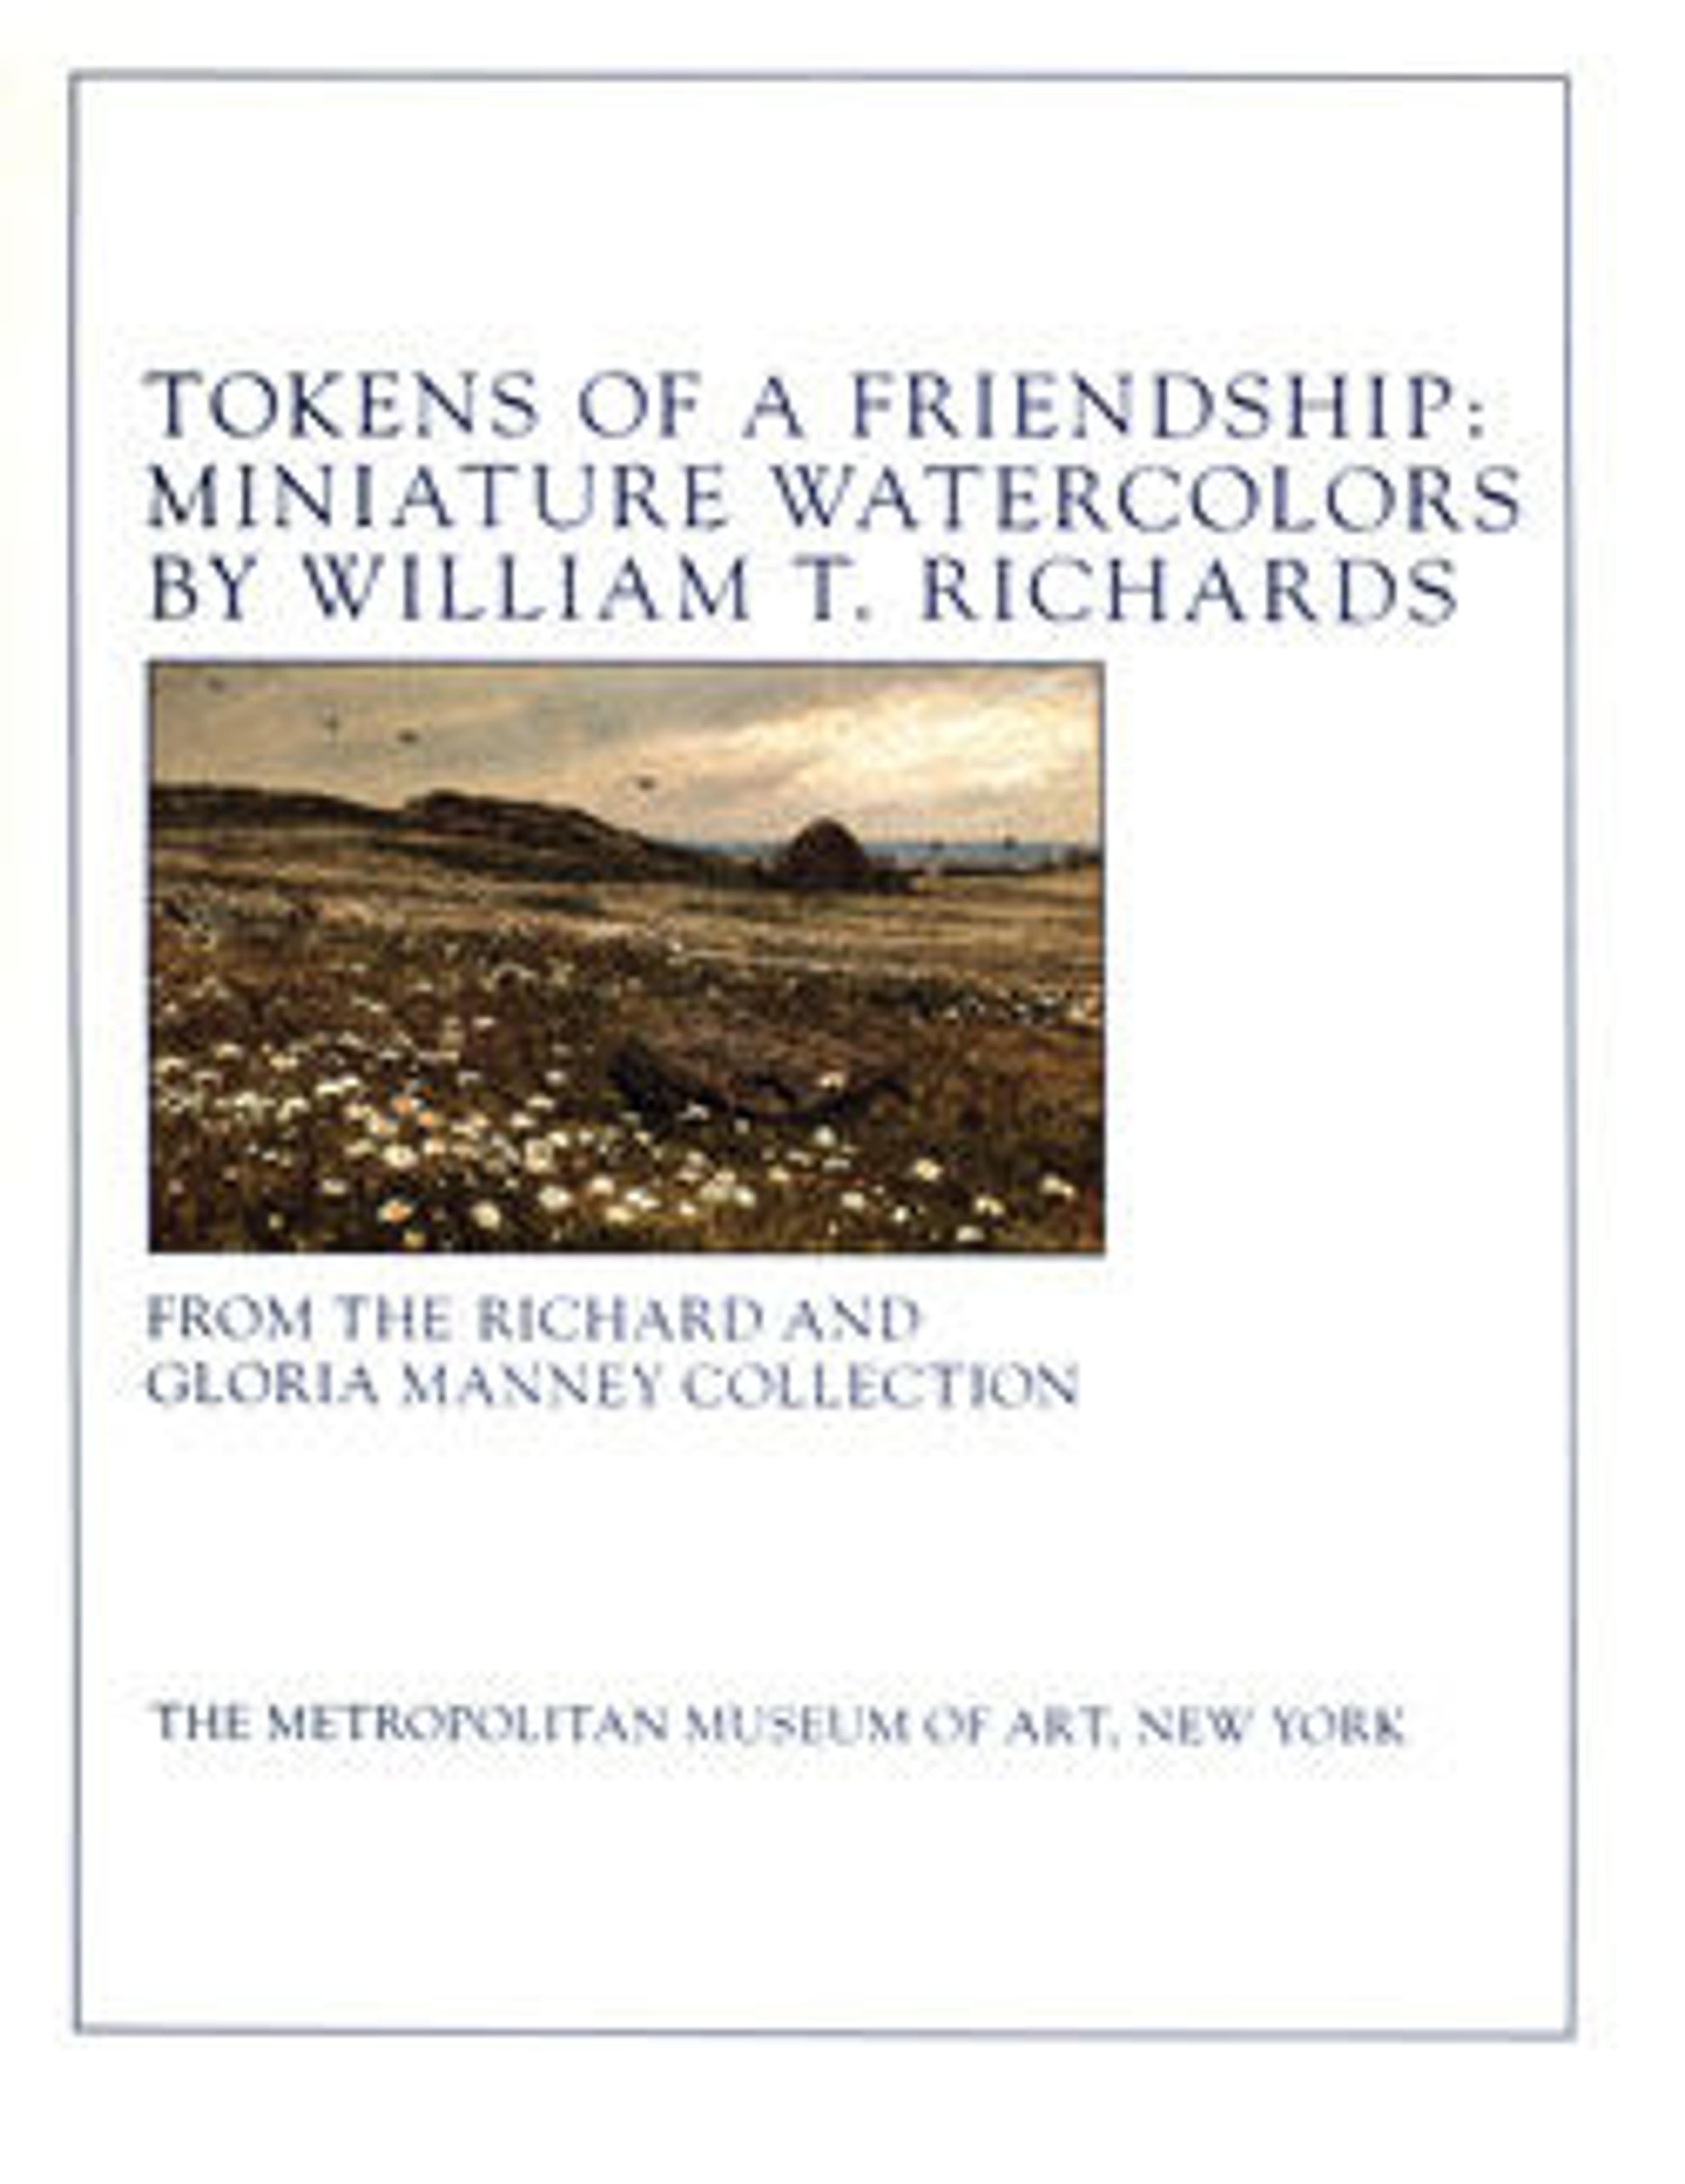 Tokens of a Friendship: Miniature Watercolors by William T. Richards